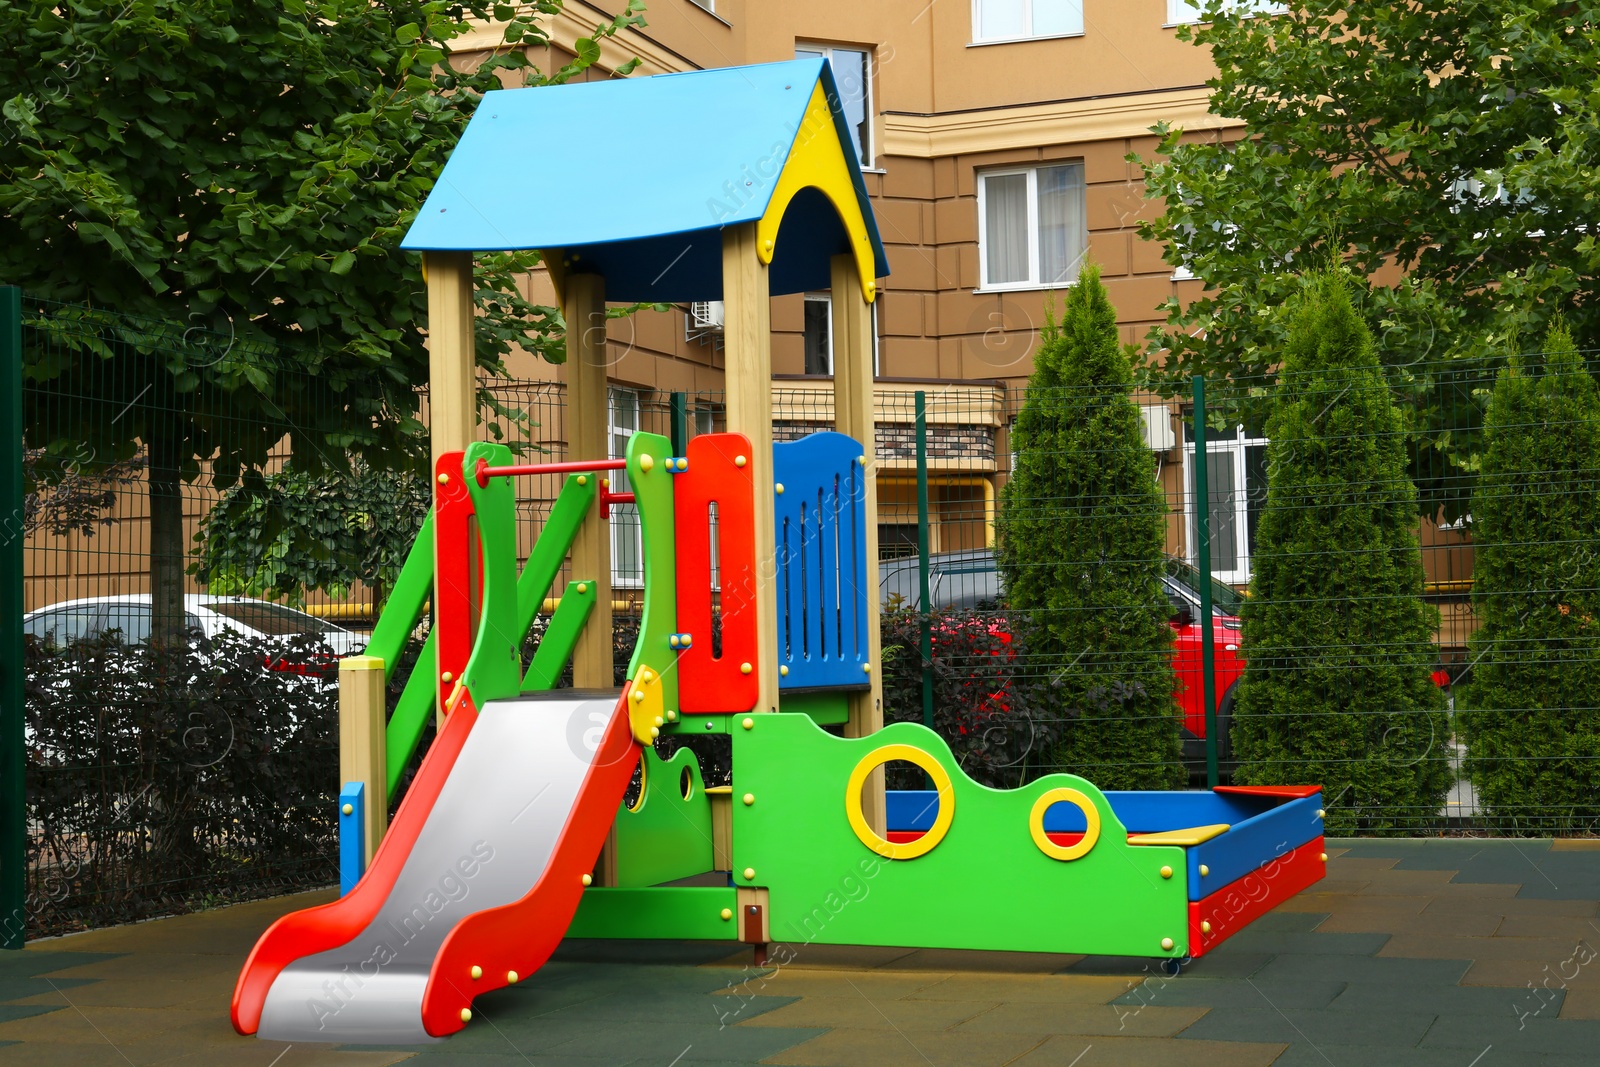 Photo of Empty outdoor children's playground with slide in residential area